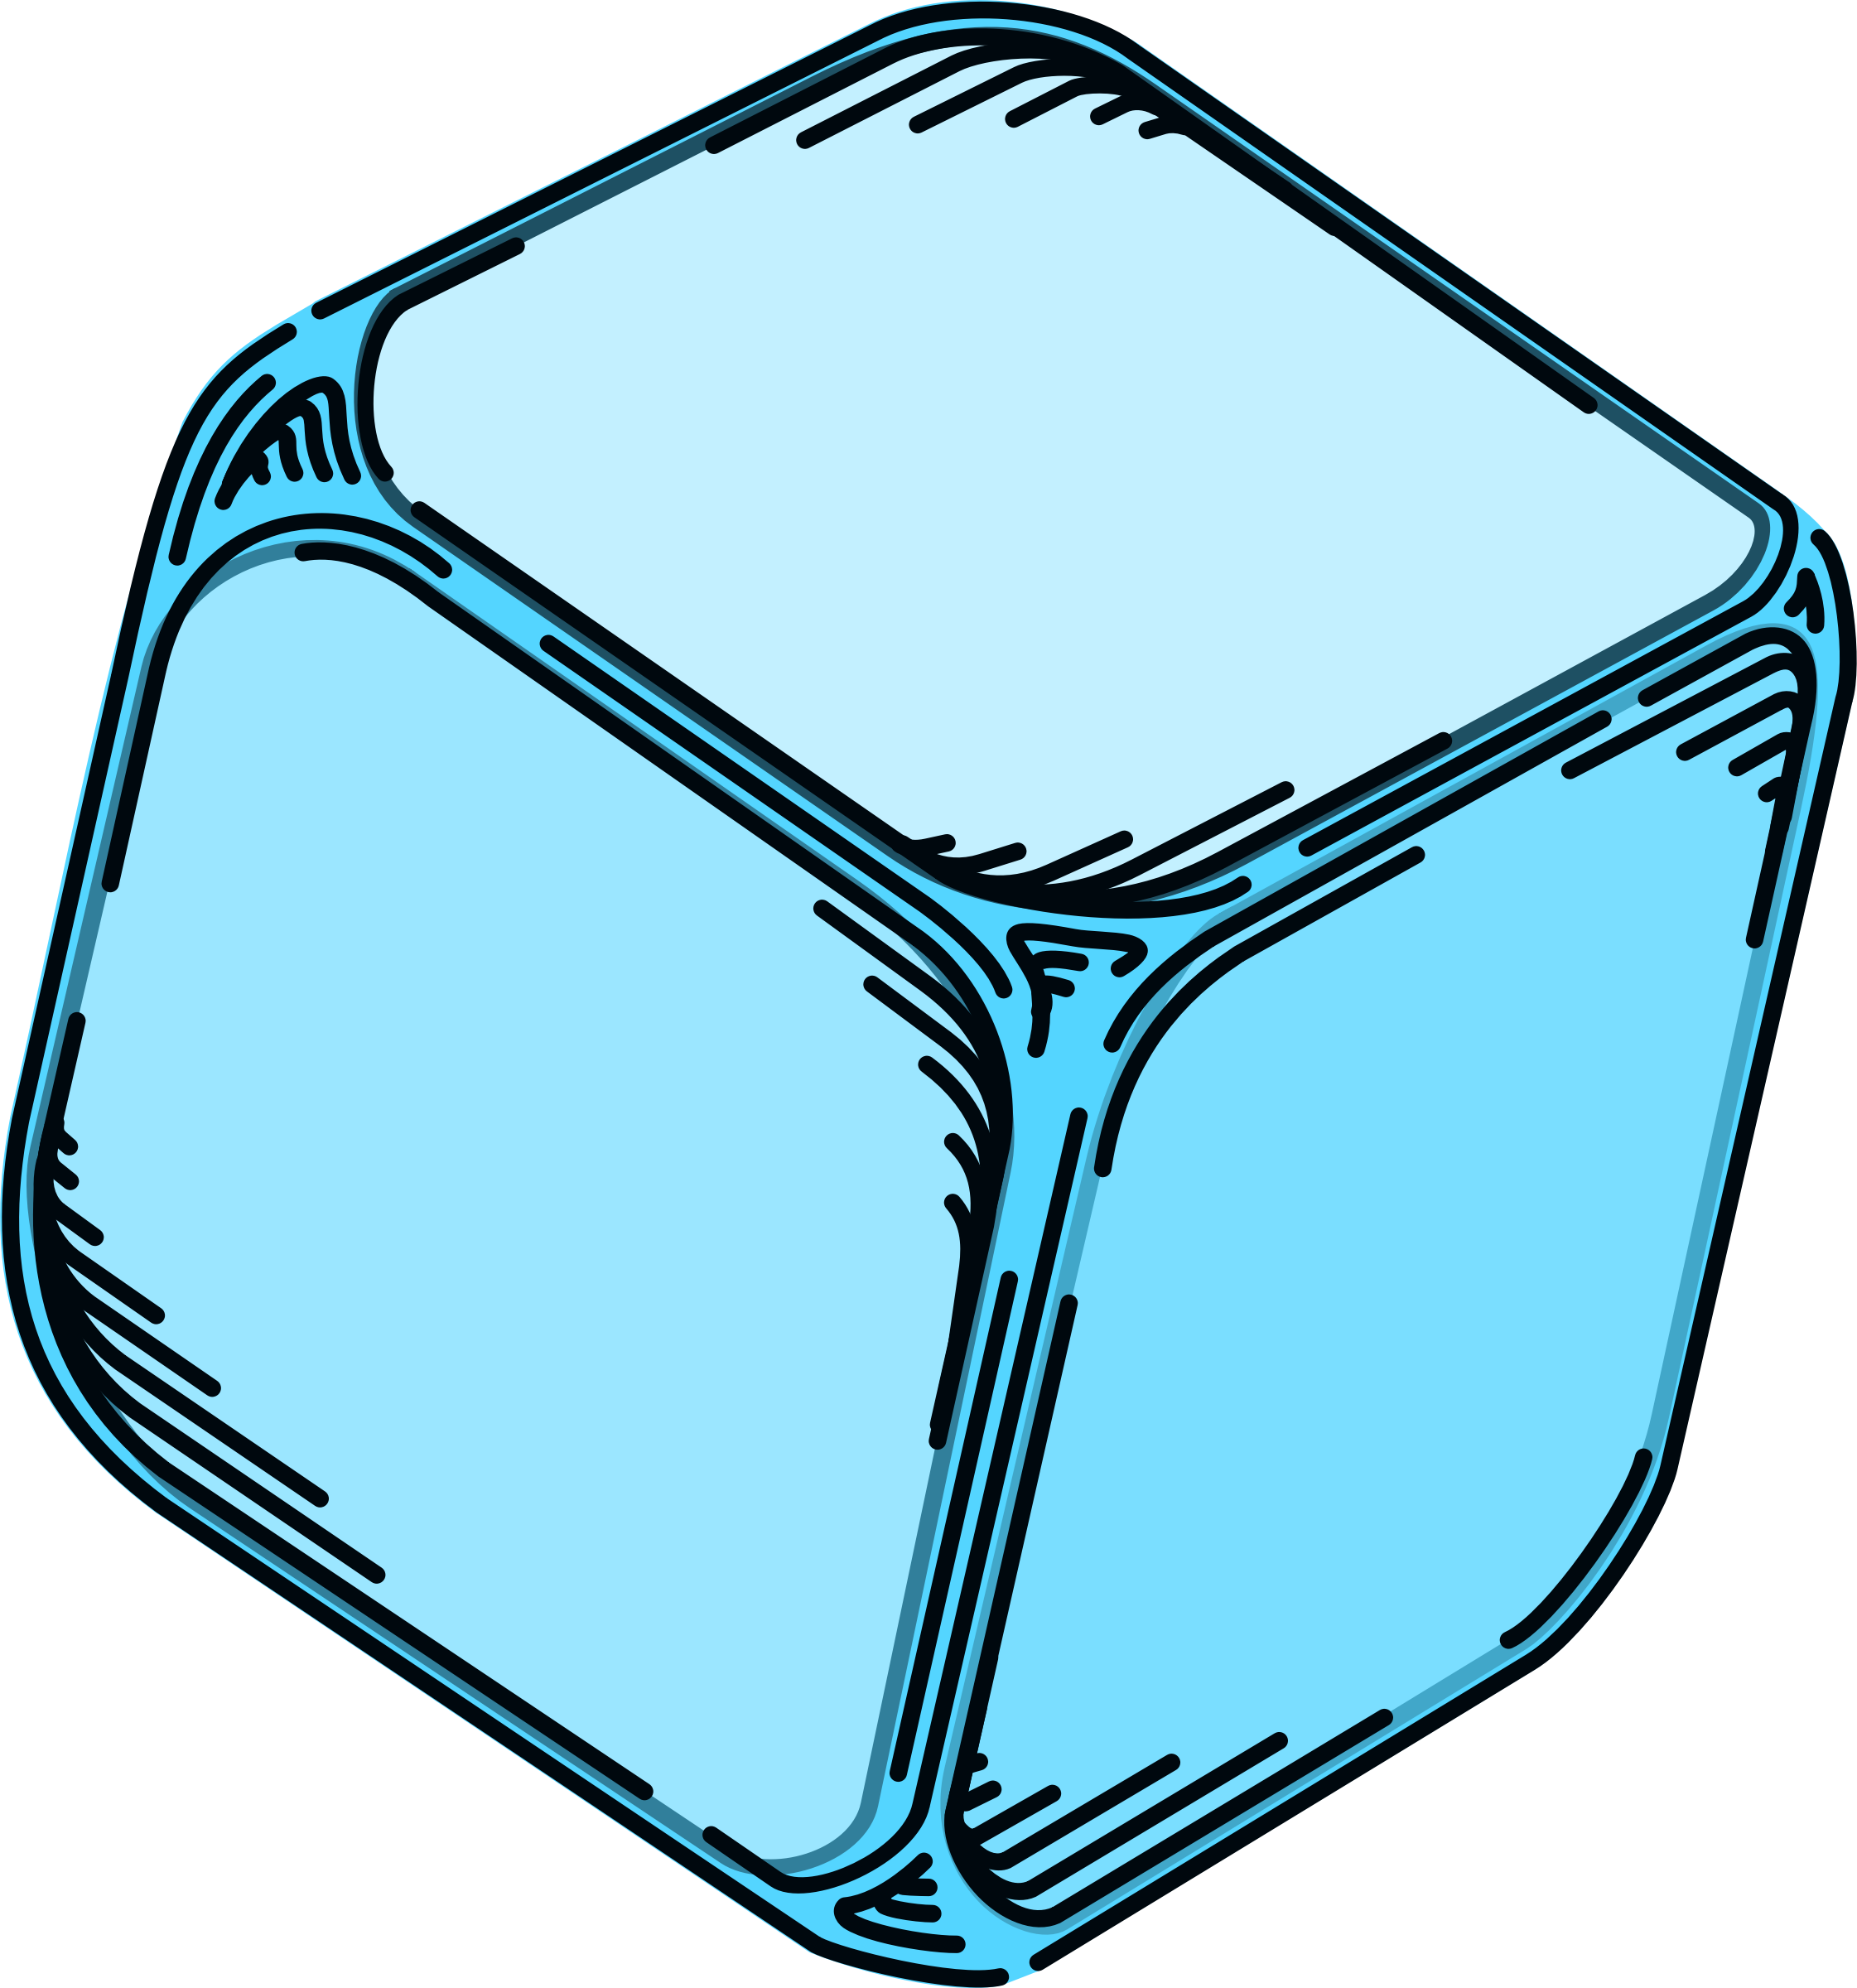 dice clipart teal